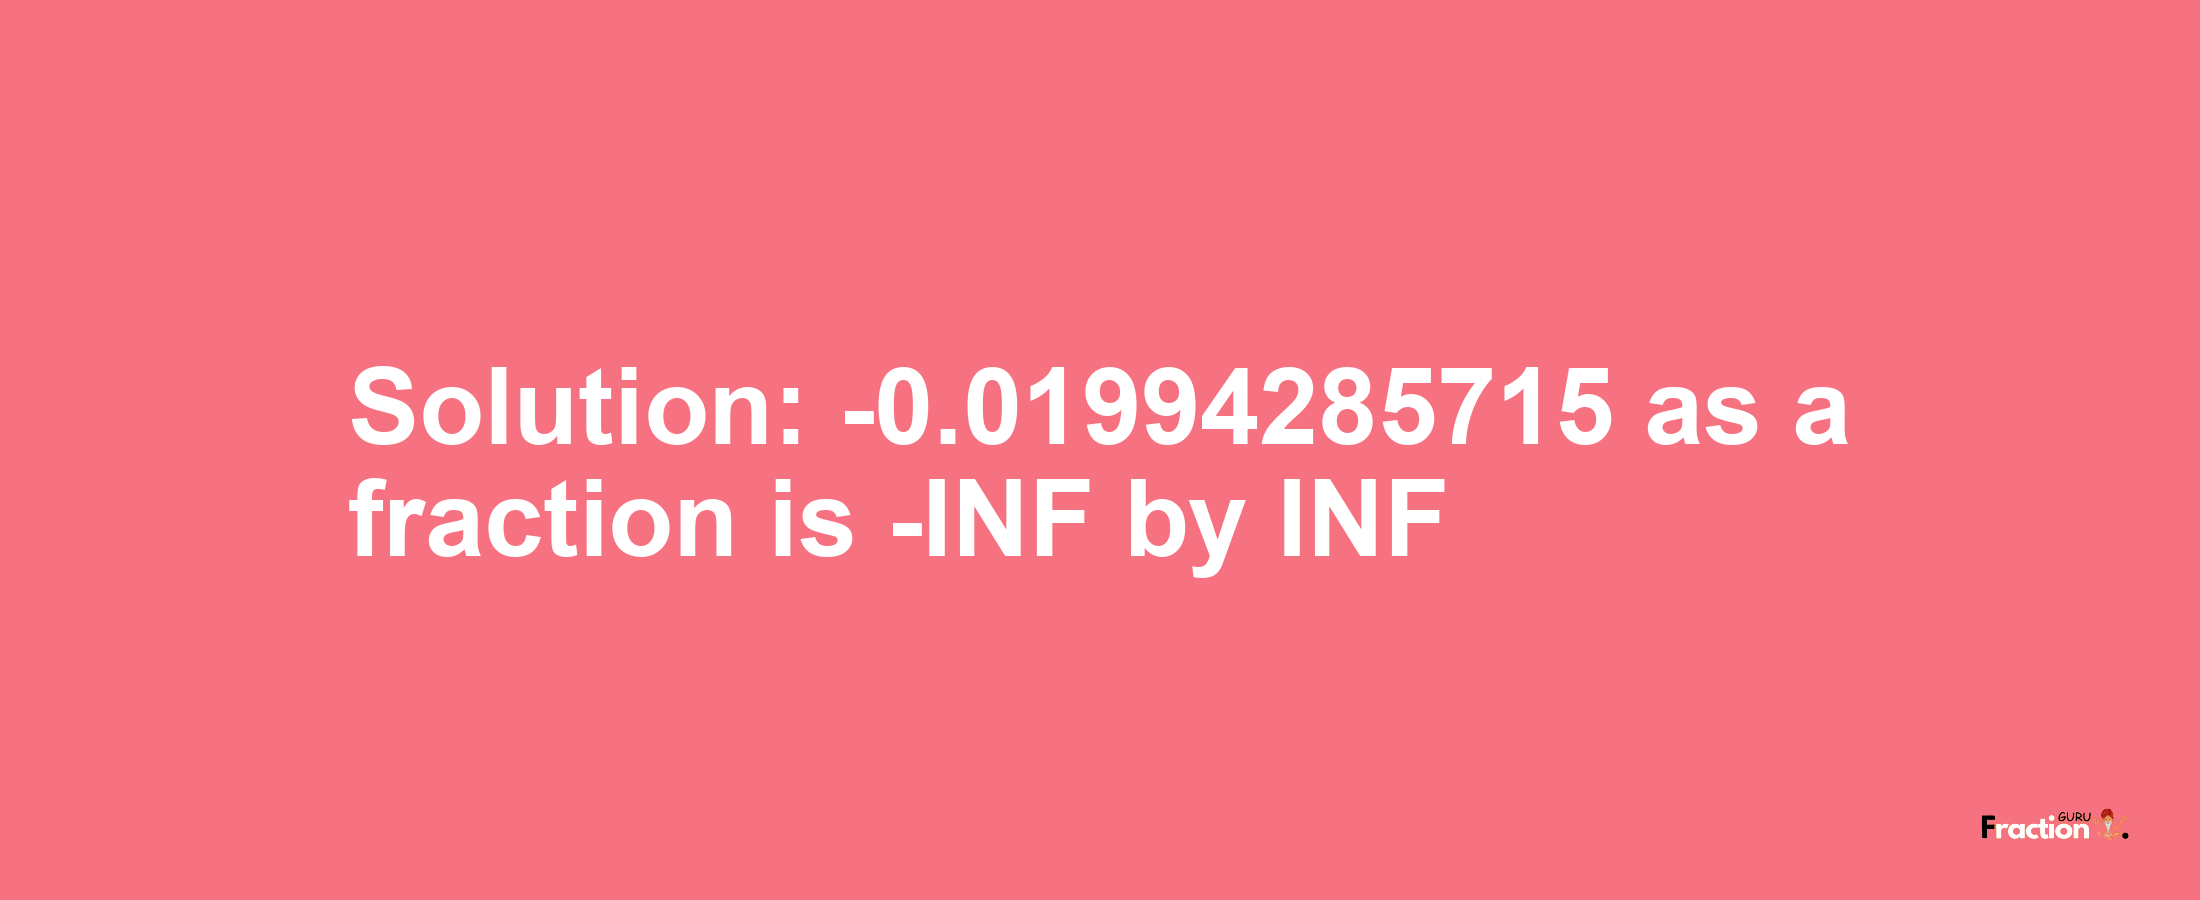 Solution:-0.01994285715 as a fraction is -INF/INF